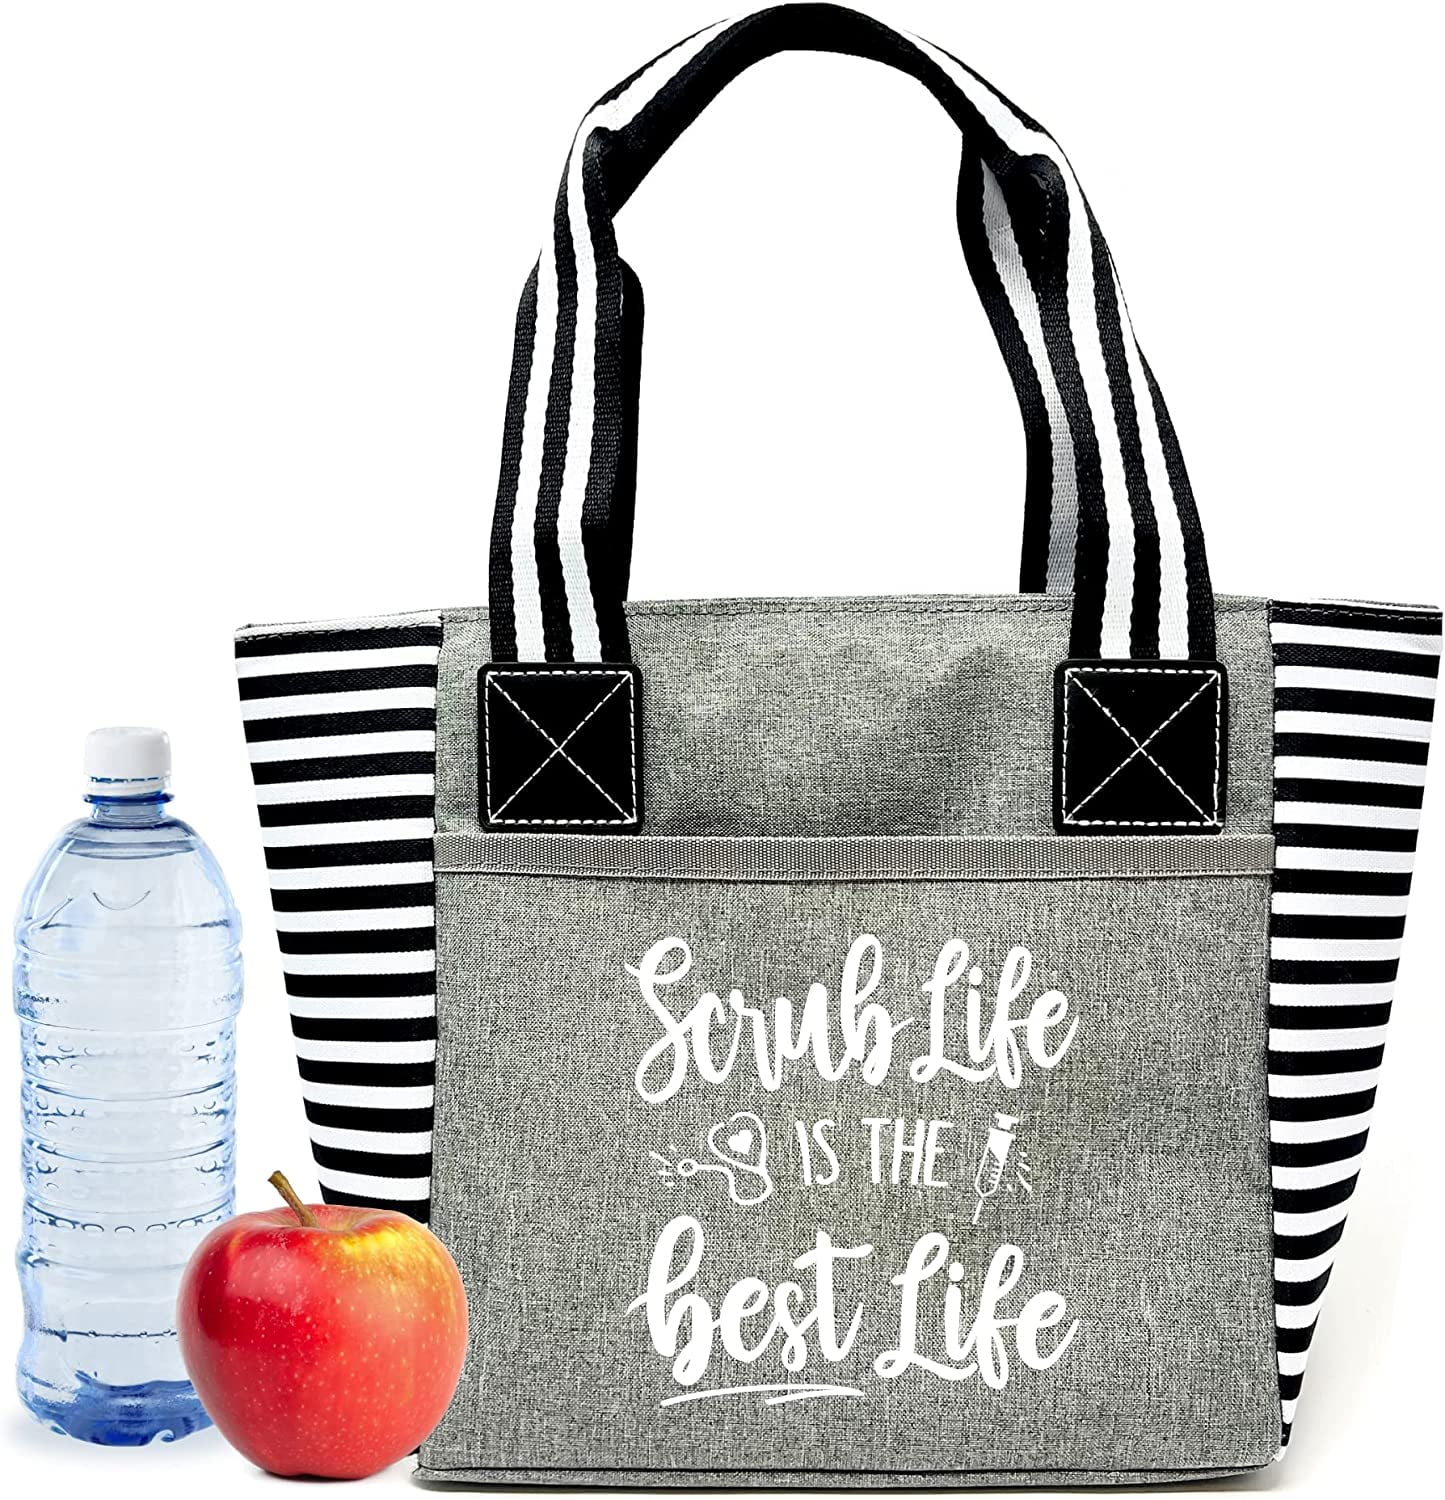 Top Picks: More than 30 of the Best Lunch Bags for Nurses - My